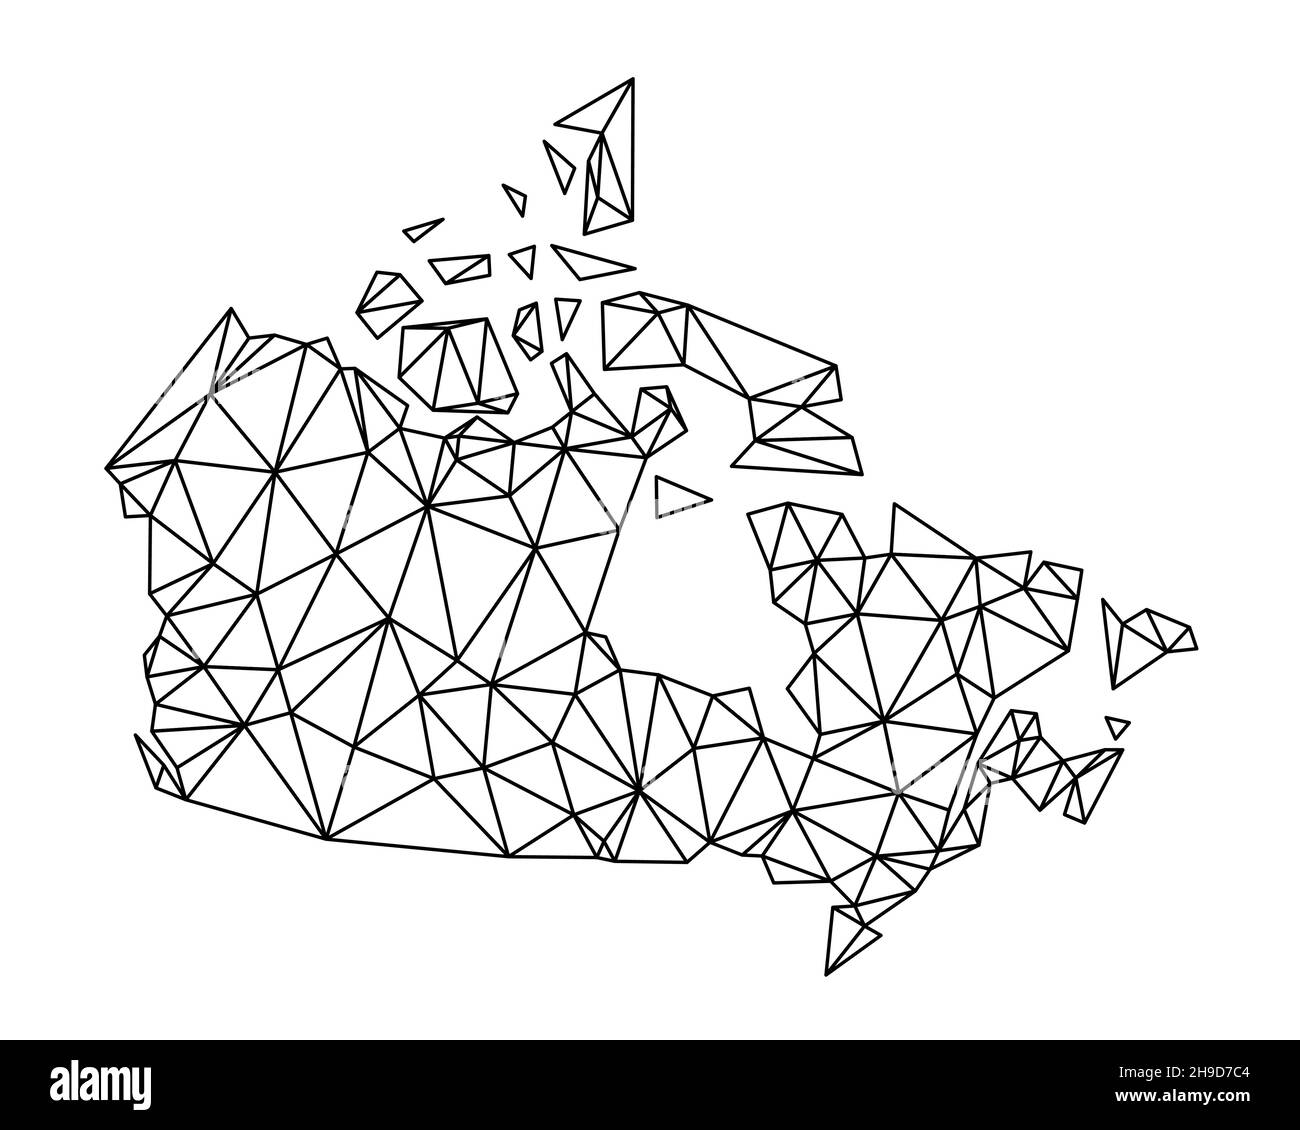 Canada polygon map. Low poly trendy style vector map of Canada. Stock Vector